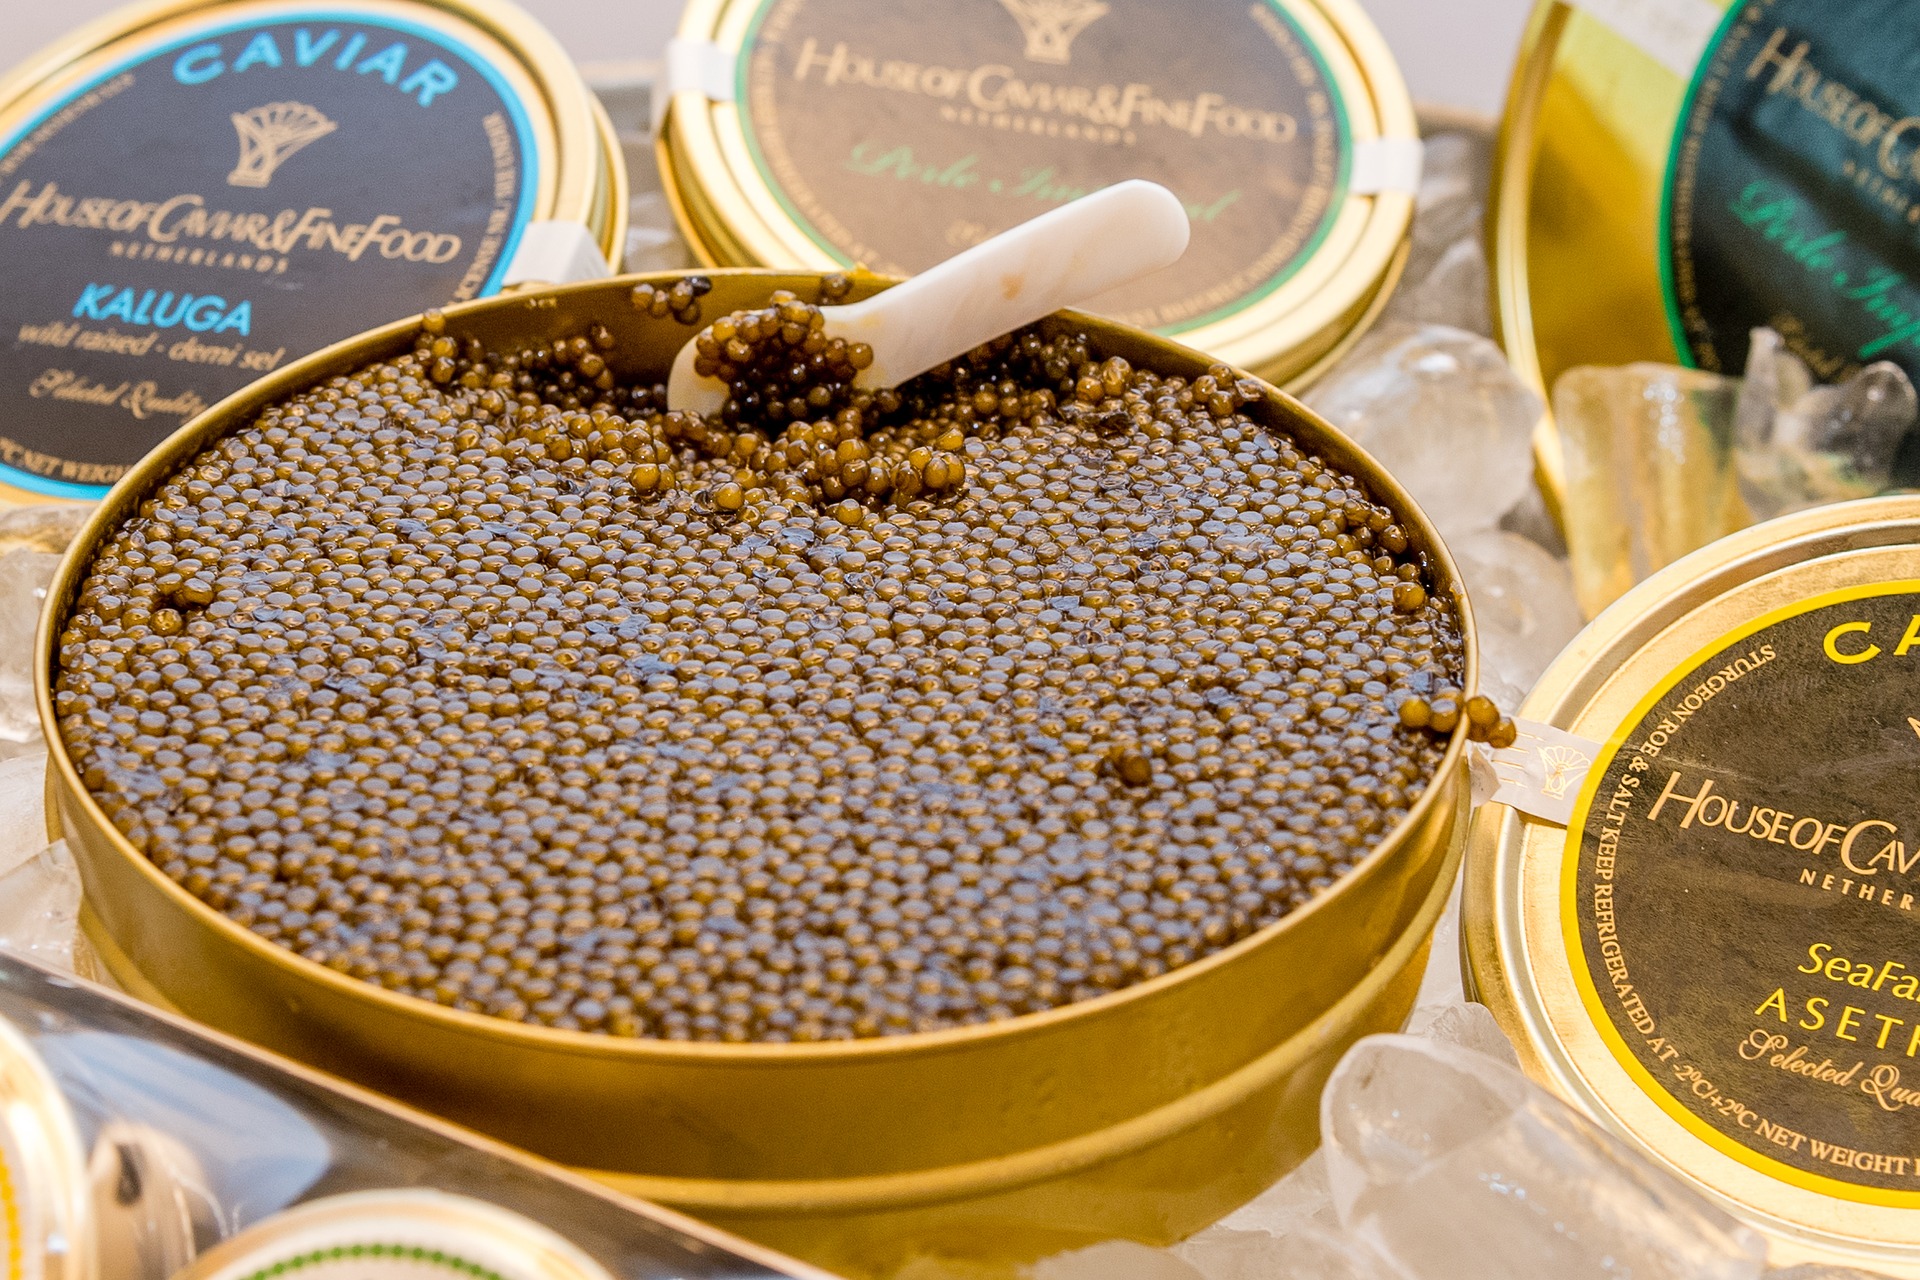 Caviar: Nutrition facts and Information - Fish & Caviar